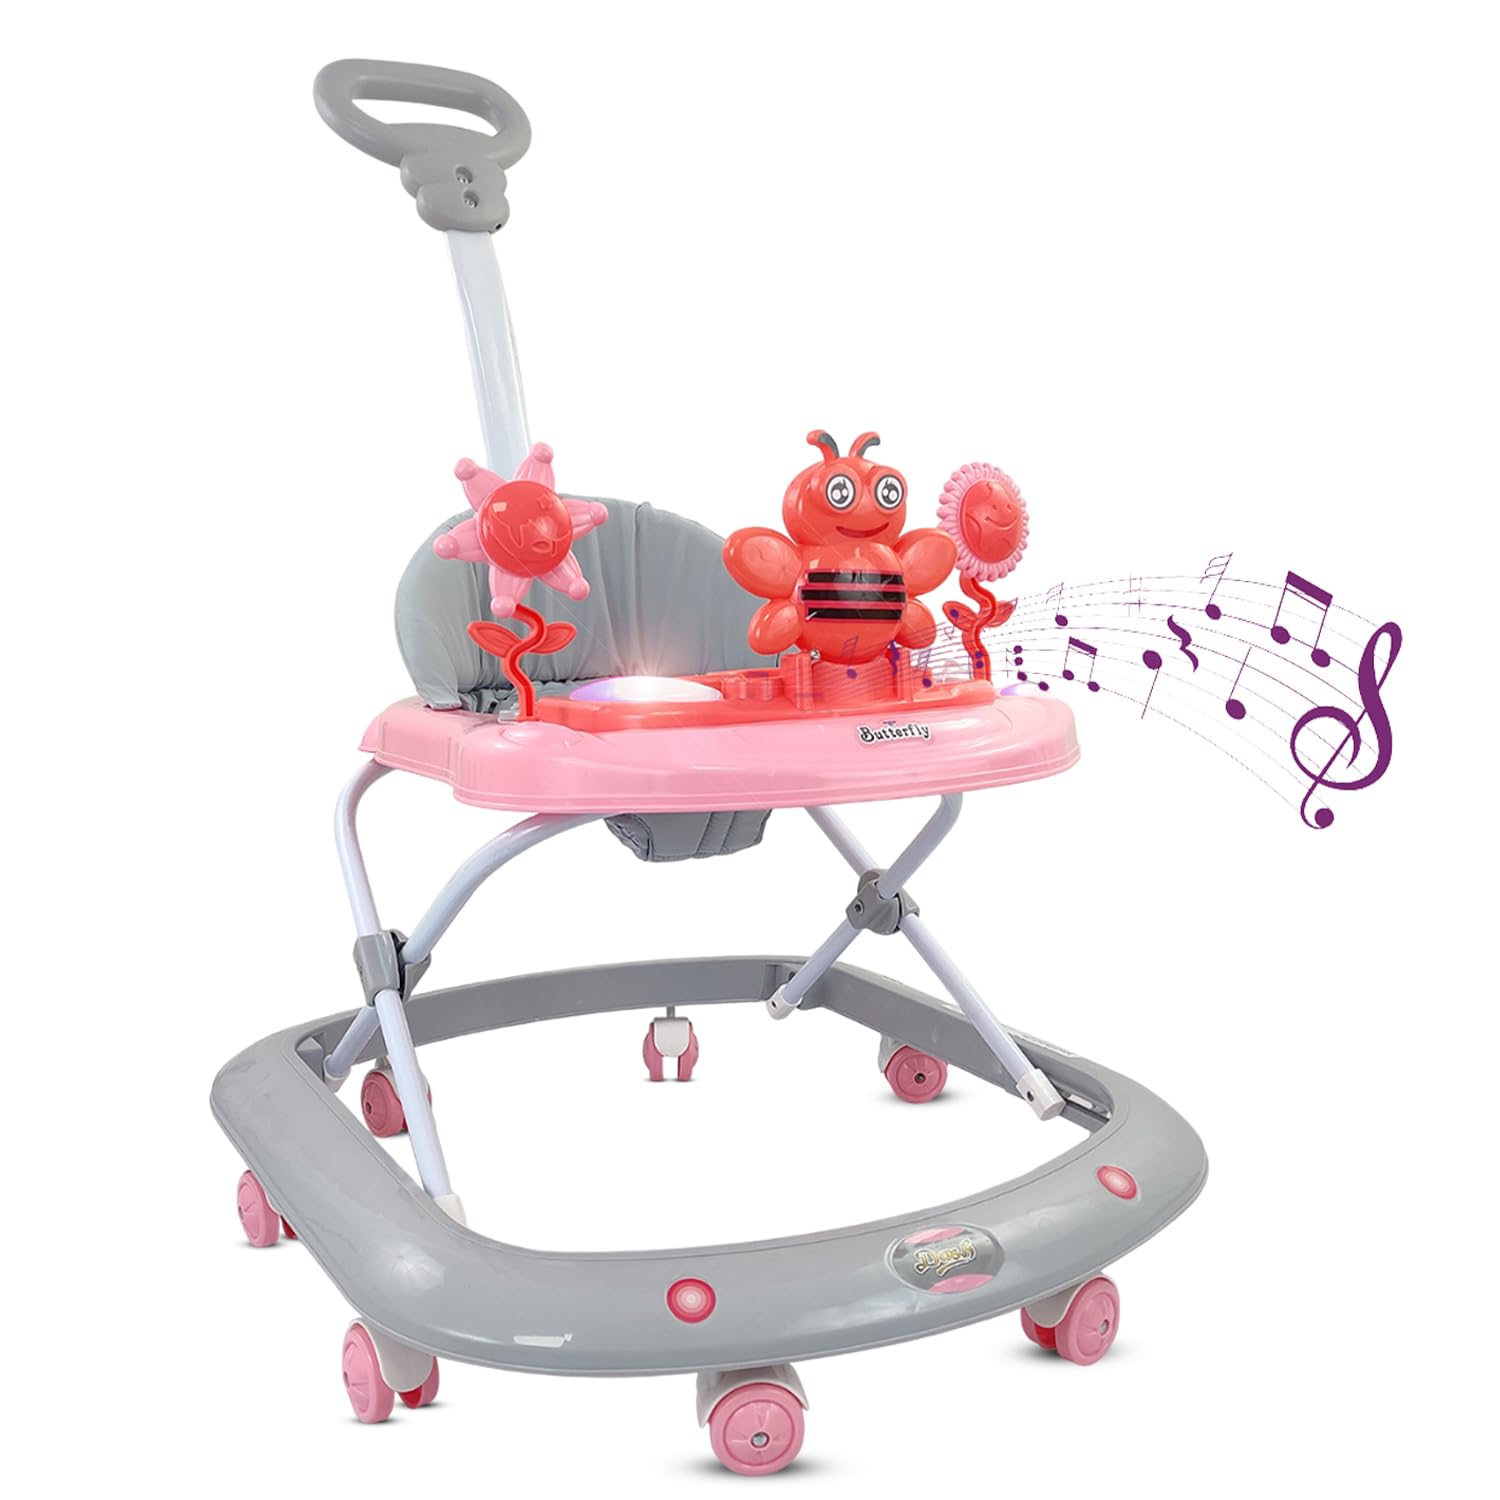 Butterfly Deluxe Baby Walker with 3 Position Adjustable Height Music & Light & Parental Handle, Foldable Activity Walker, Baby 6-18 Months boy, Walker for Kids (Capacity 20kg | Blue)